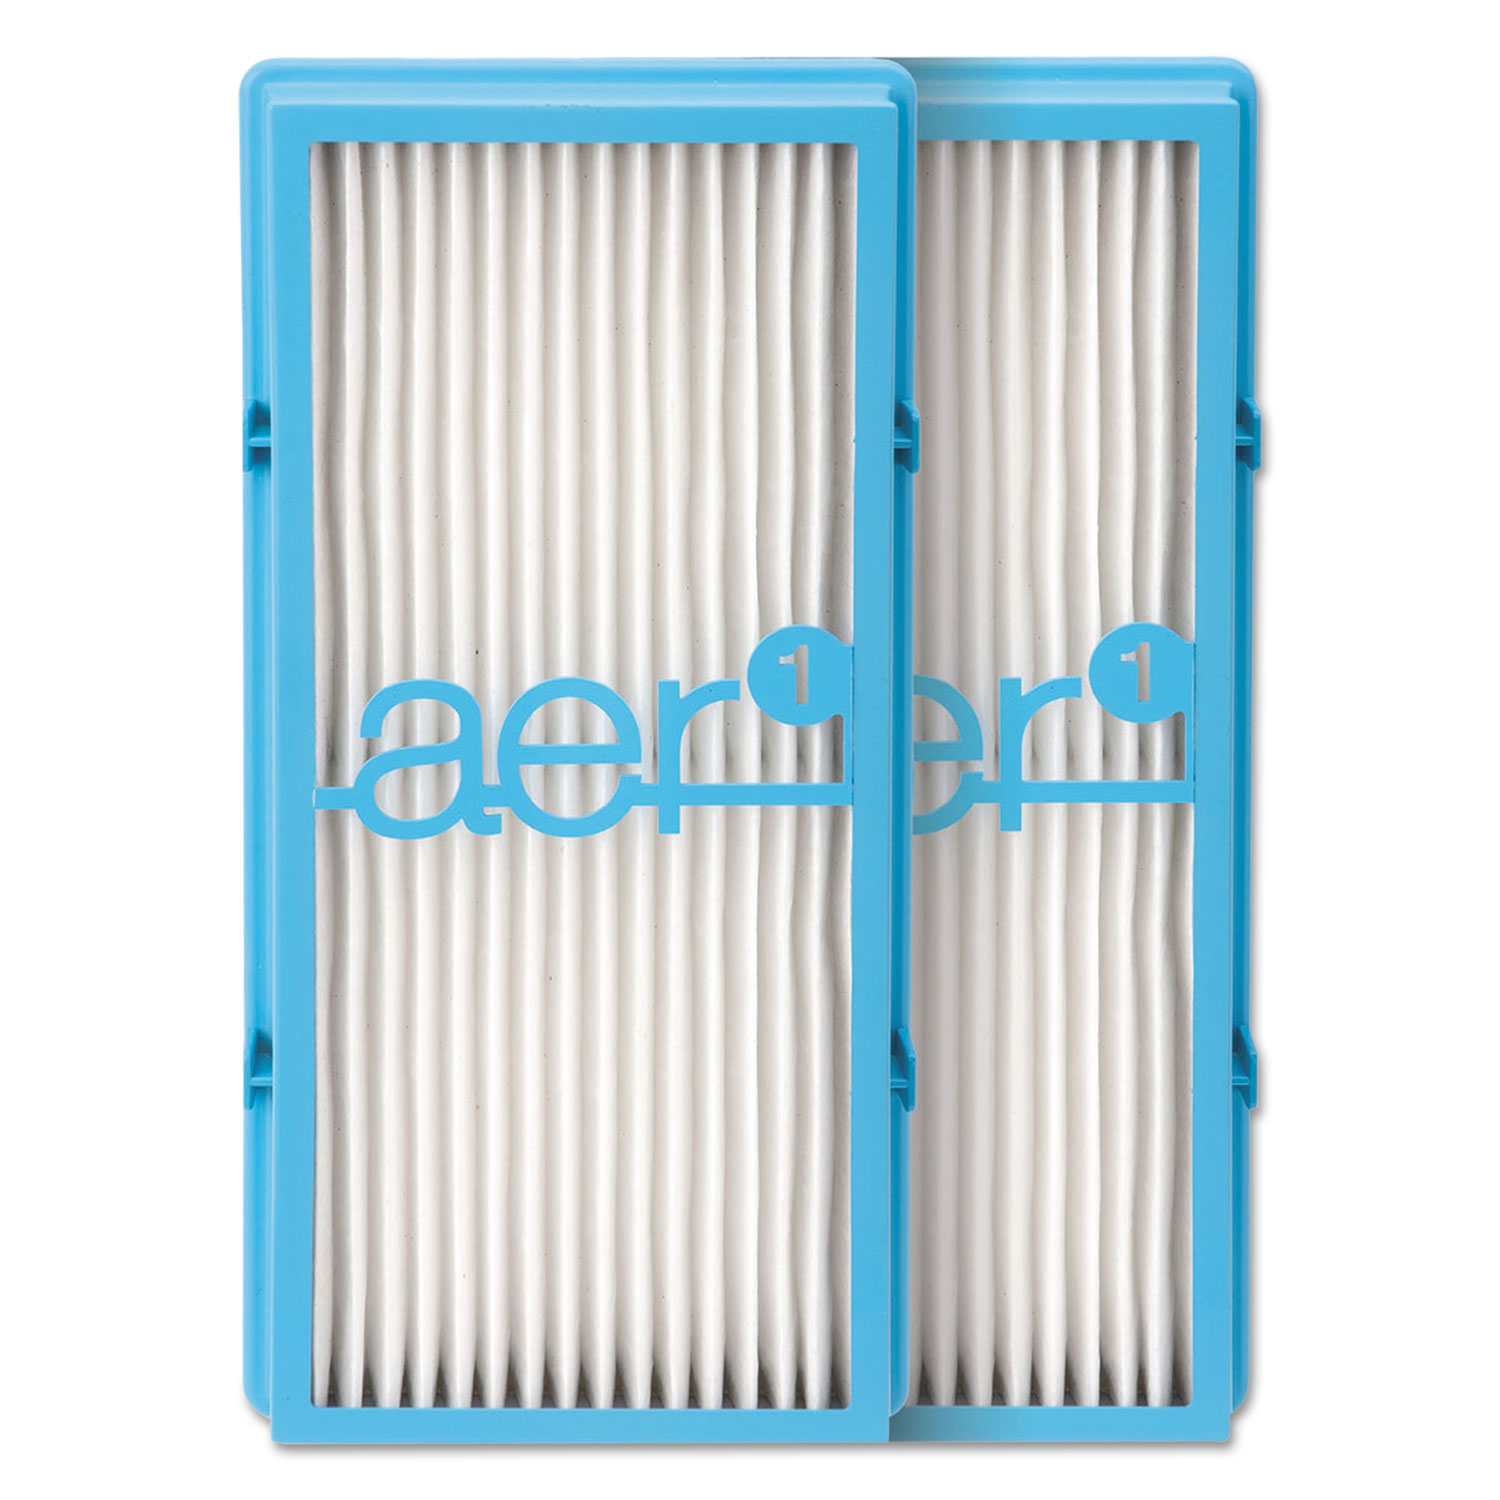  Holmes HAPF30ATDU4R aer1 HEPA Type Total Air with Dust Elimination Replacement Filter, 2/Each (HLSHAPF30ATDU4R) 